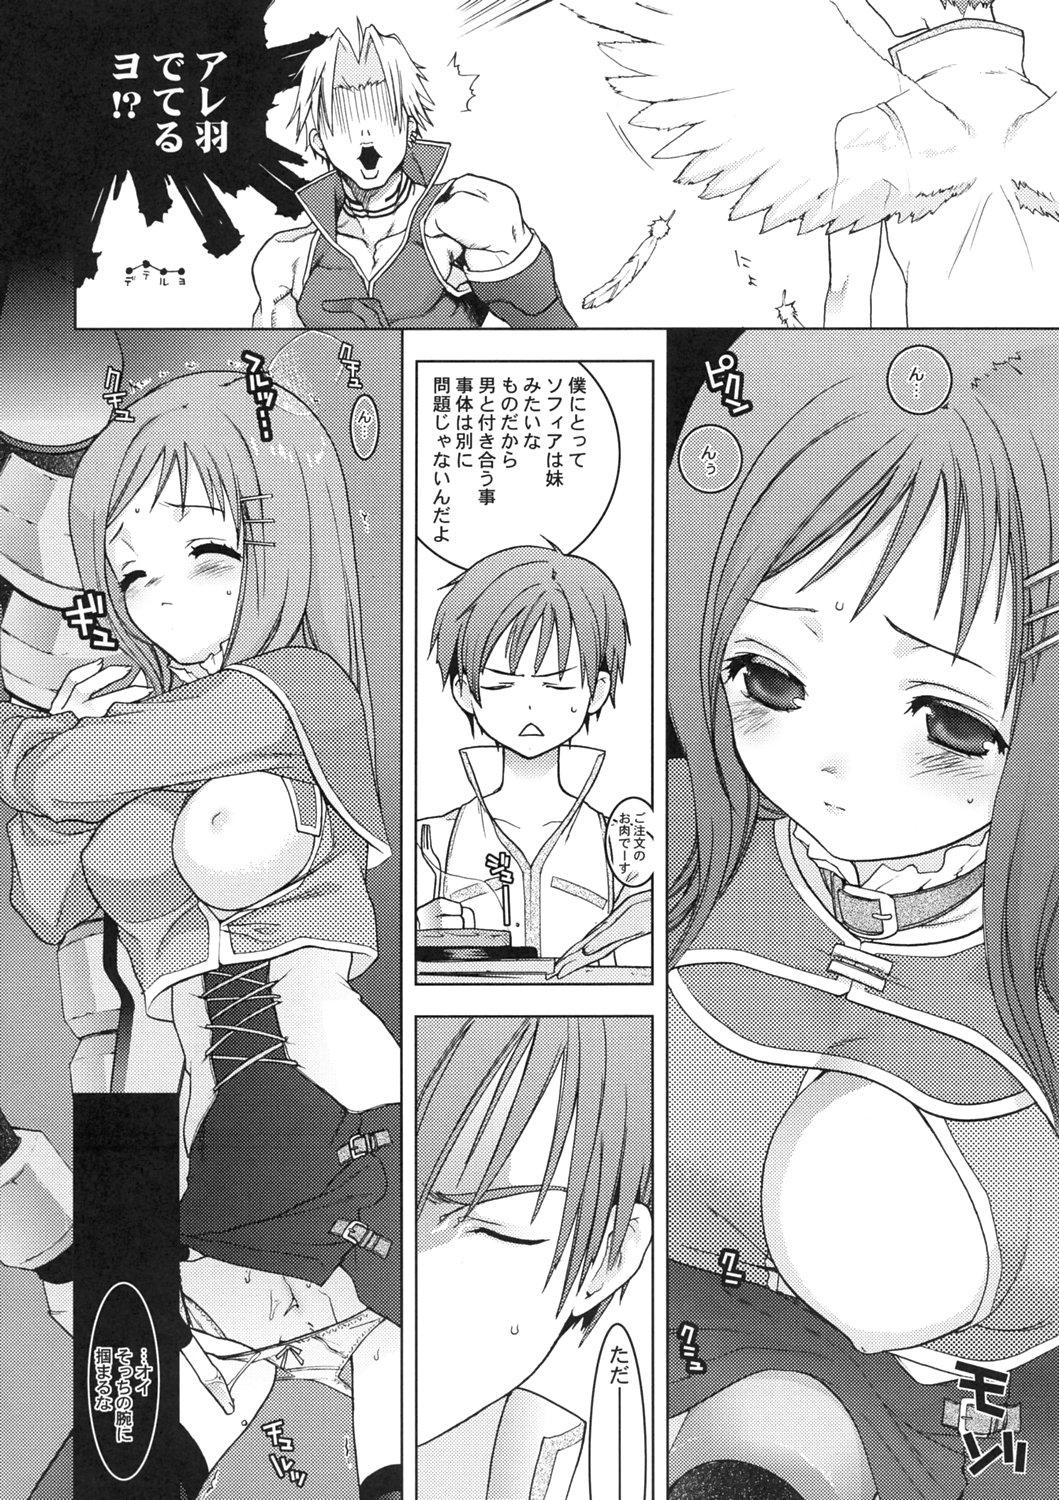 Roleplay 108 Candys 3.5 - Star ocean 3 Free Blow Job - Page 7